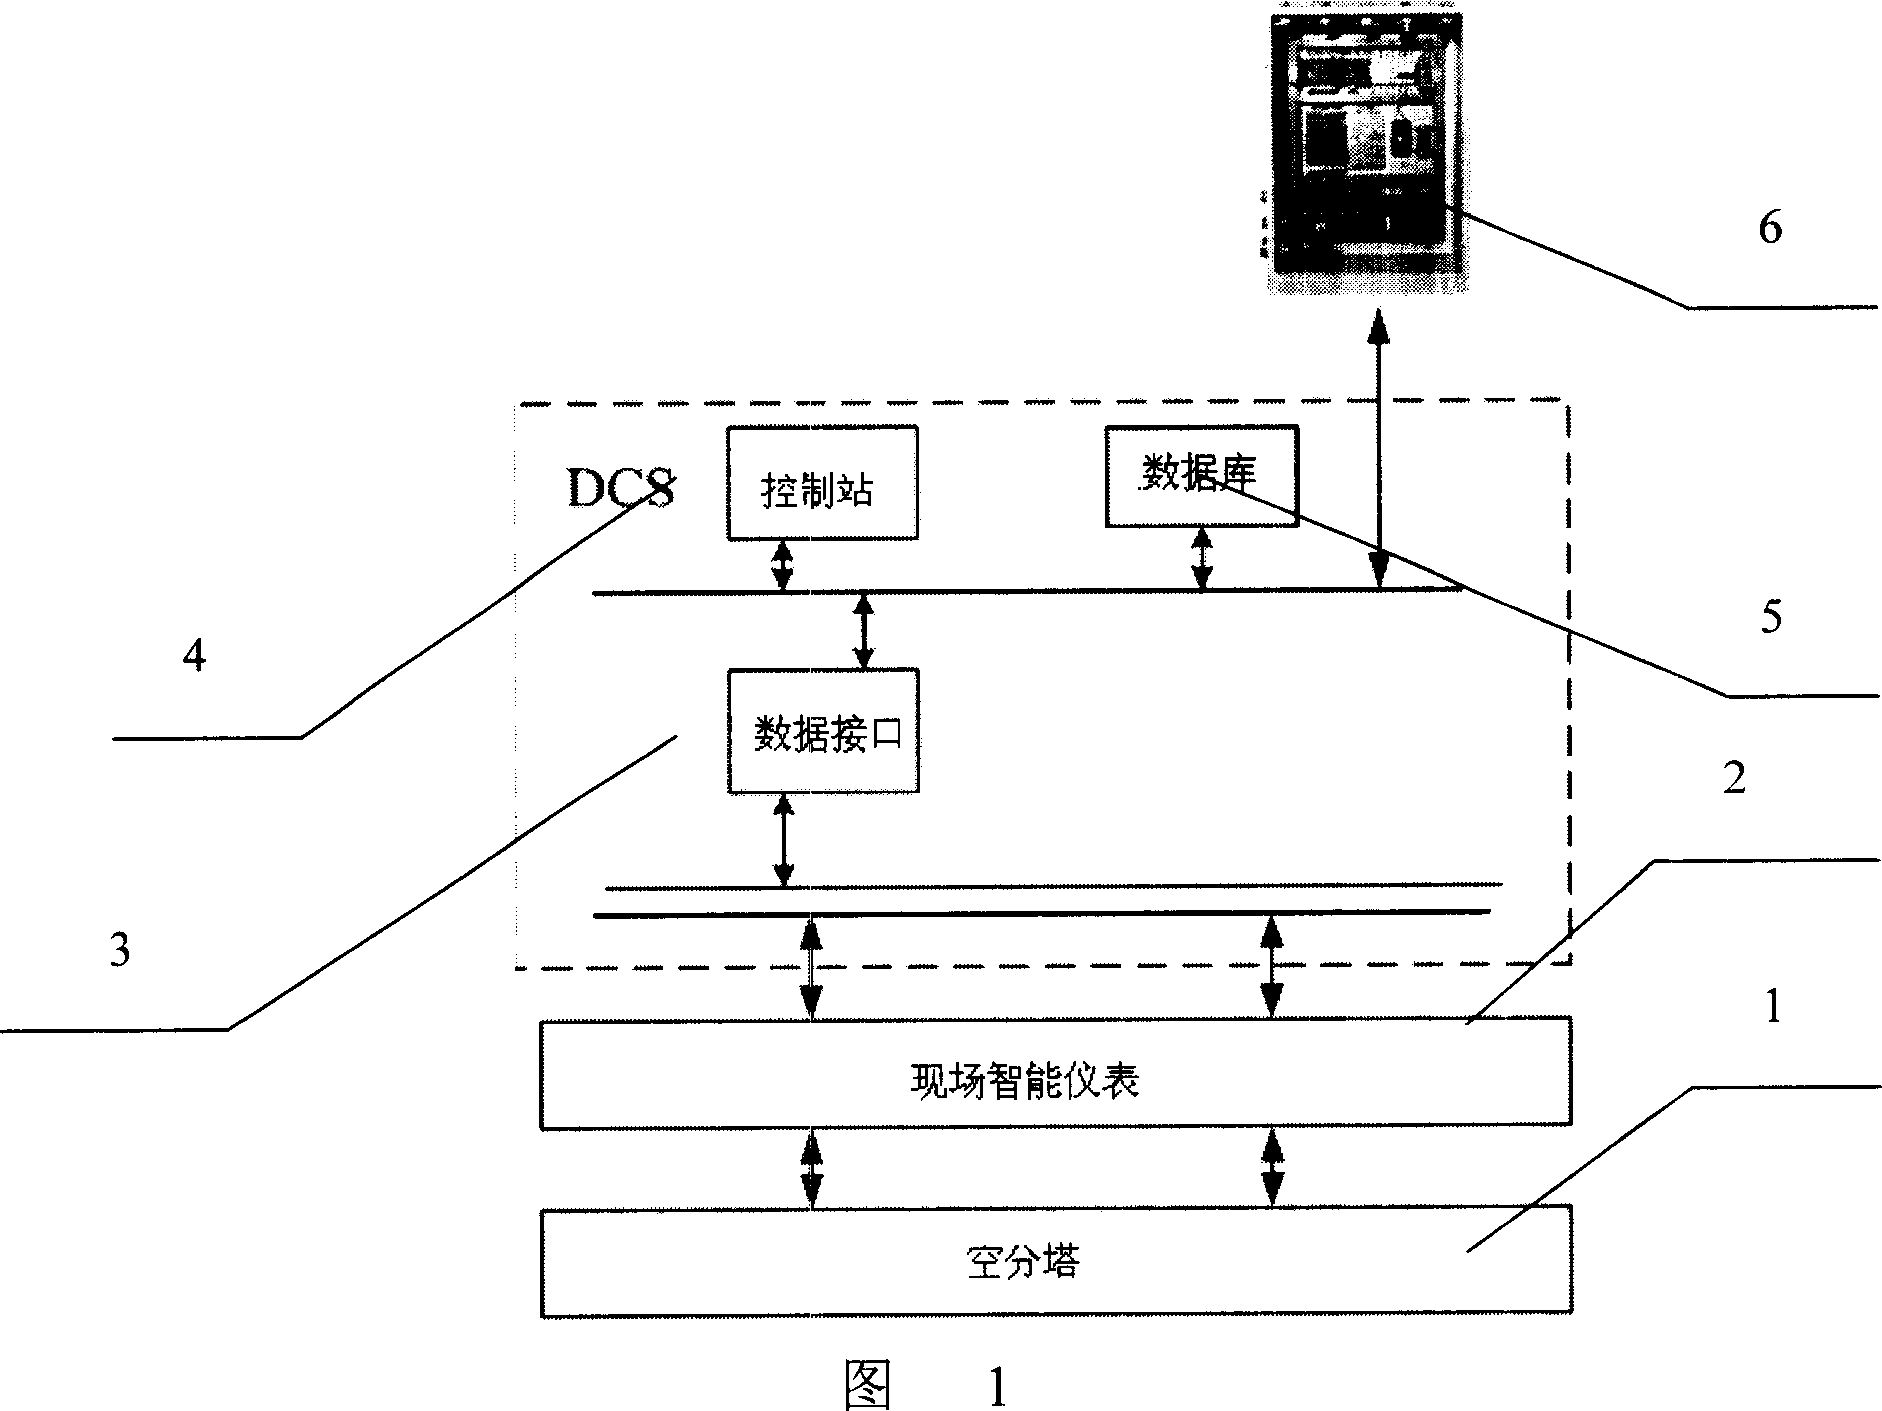 System and method for controlling air-separating tower dynamic matrix